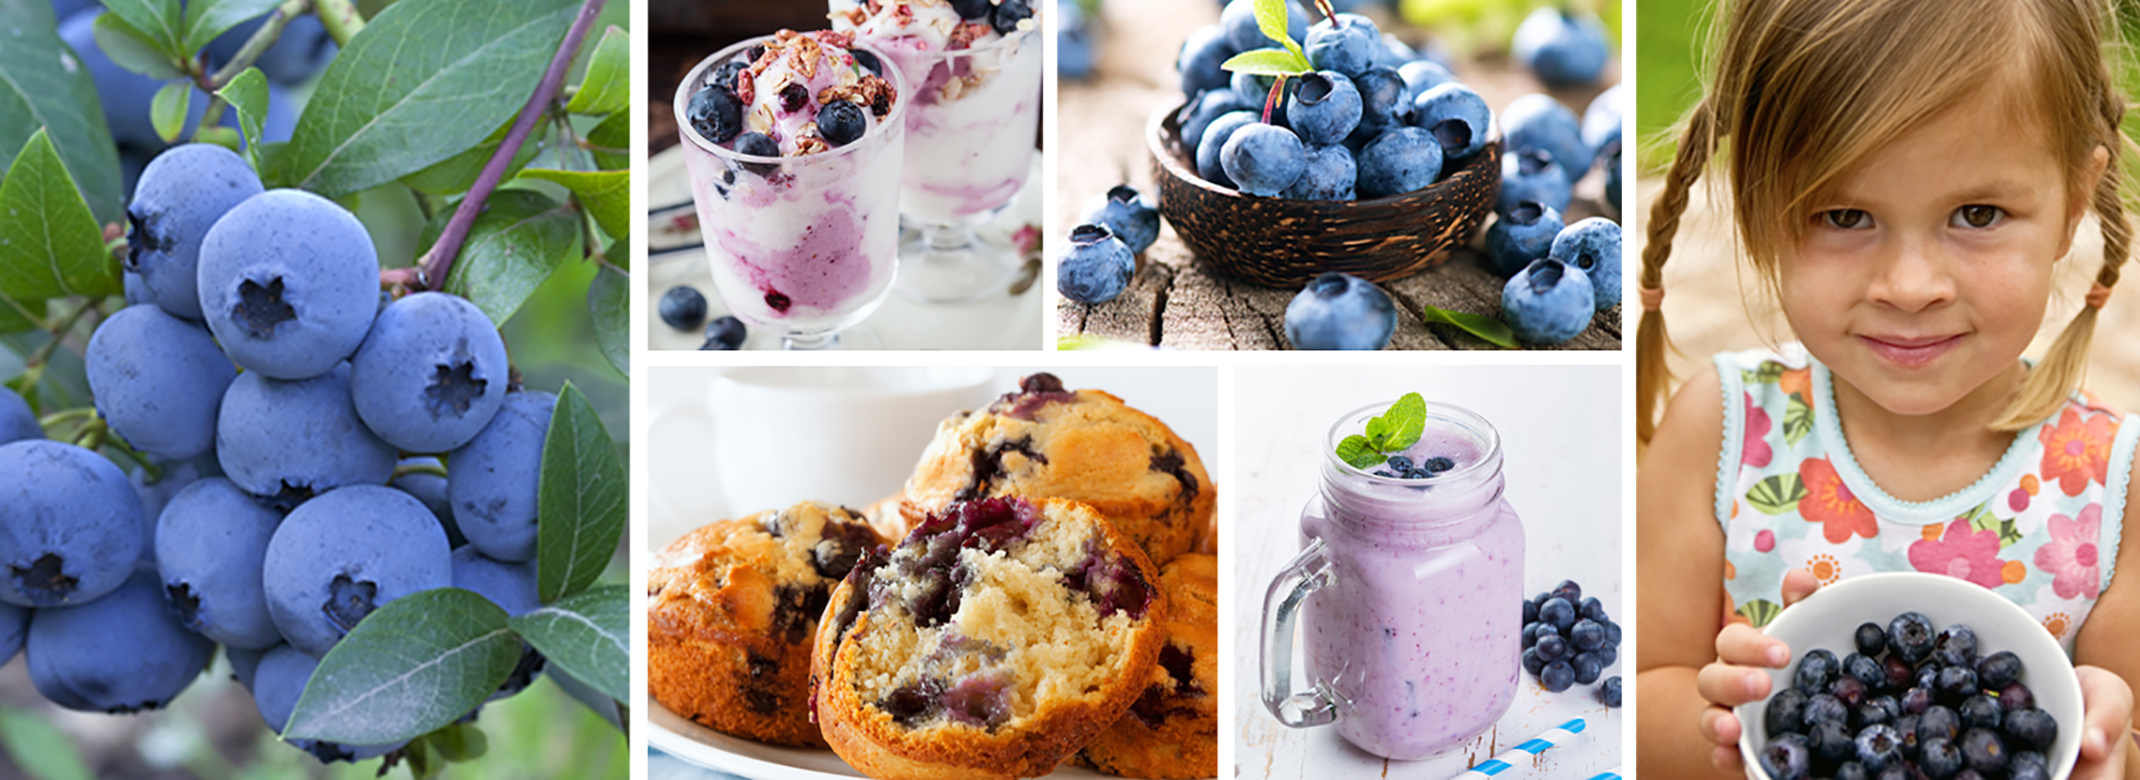 Blueberries, blueberries and yogurt, blueberry muffins, and little girl holding blueberries